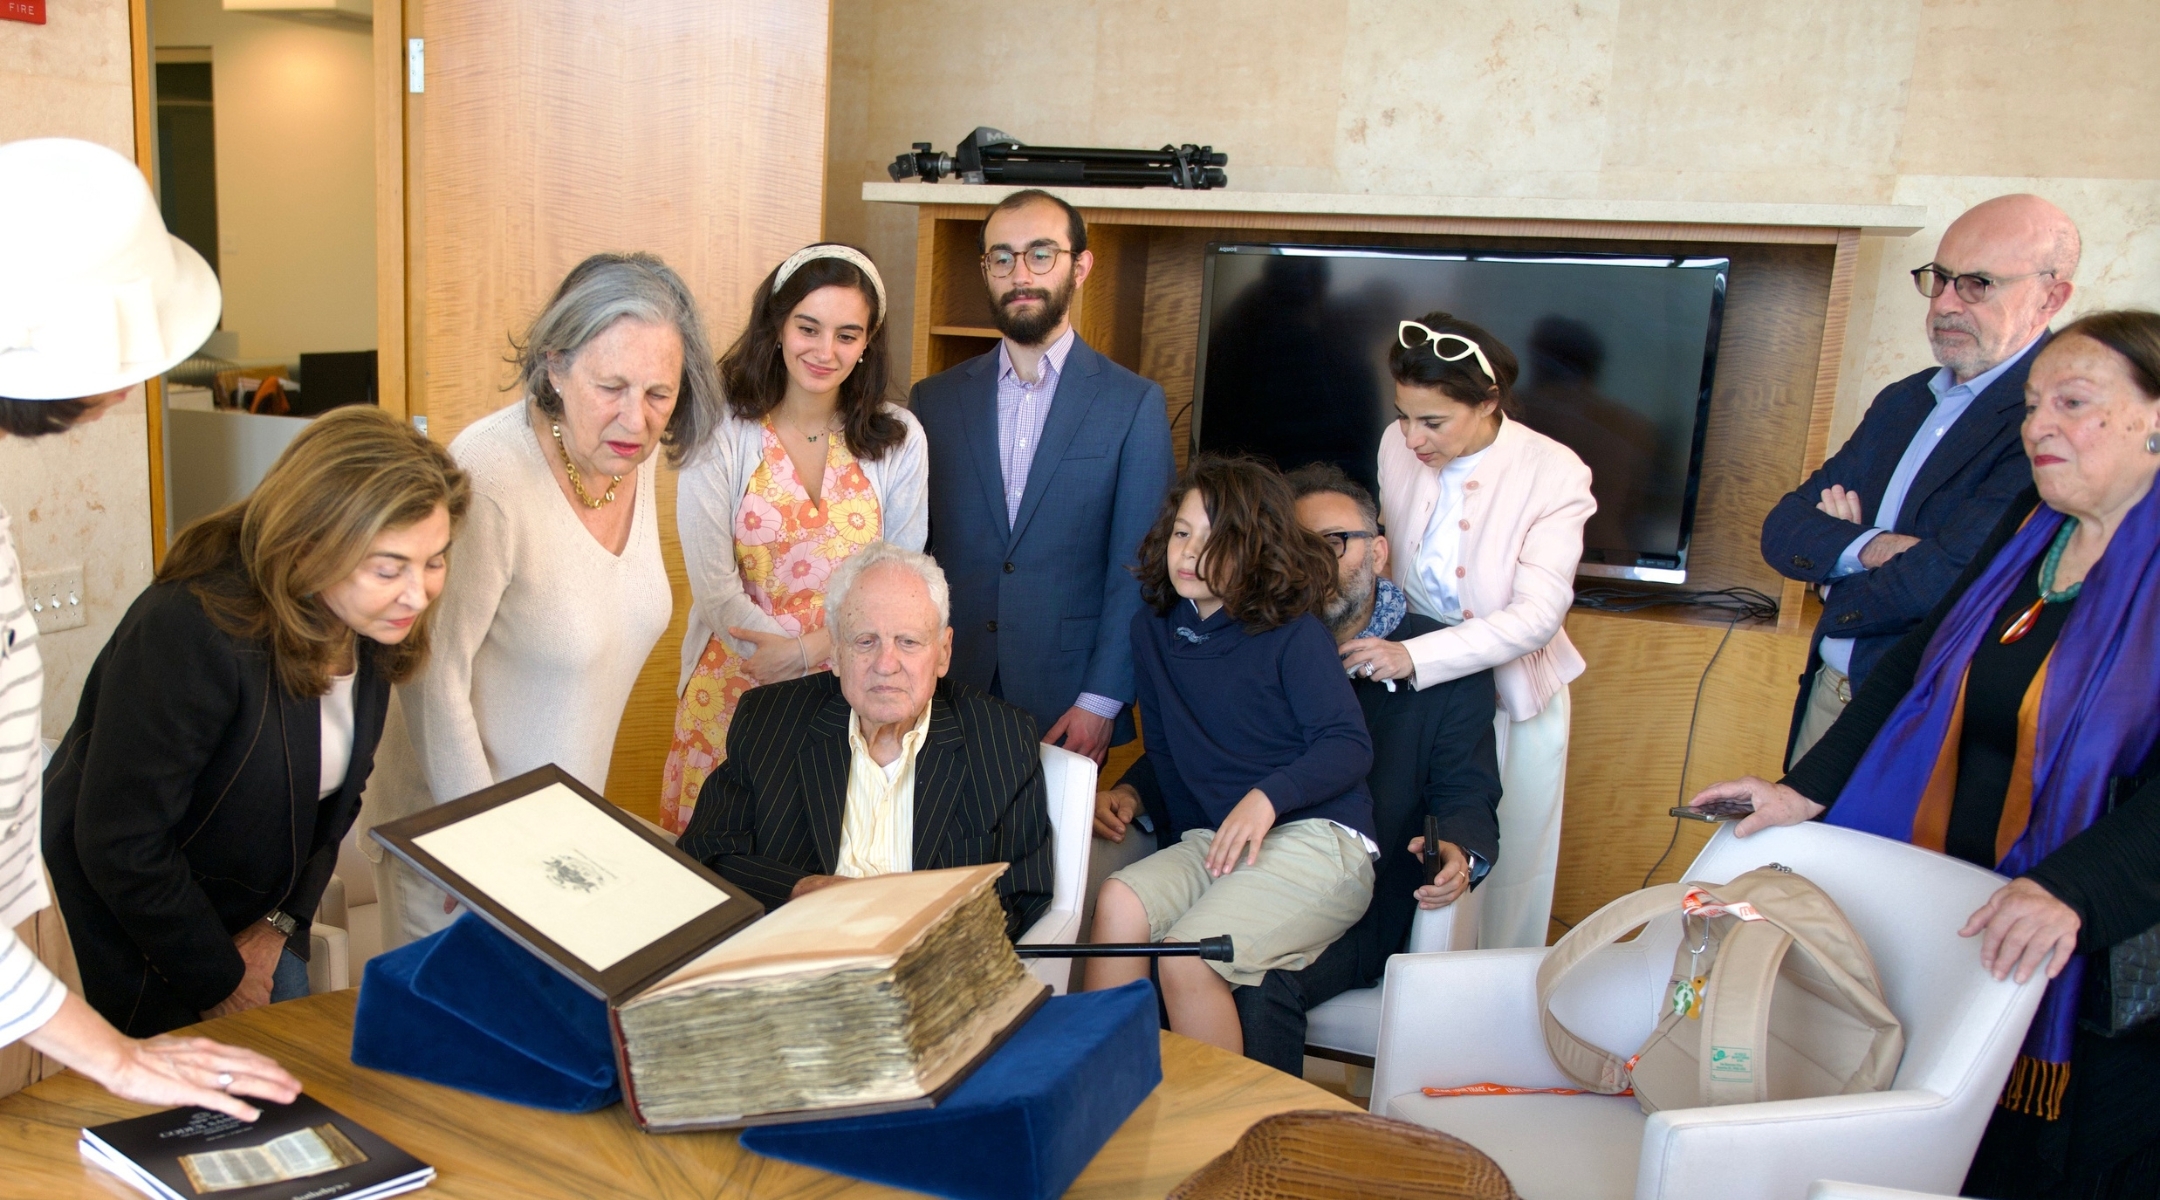 Alfred Moses (center, seated) examines the Codex Sassoon surrounded by family and friends. (Perry Bindelglass for The American Friends of ANU The Museum of the Jewish People)